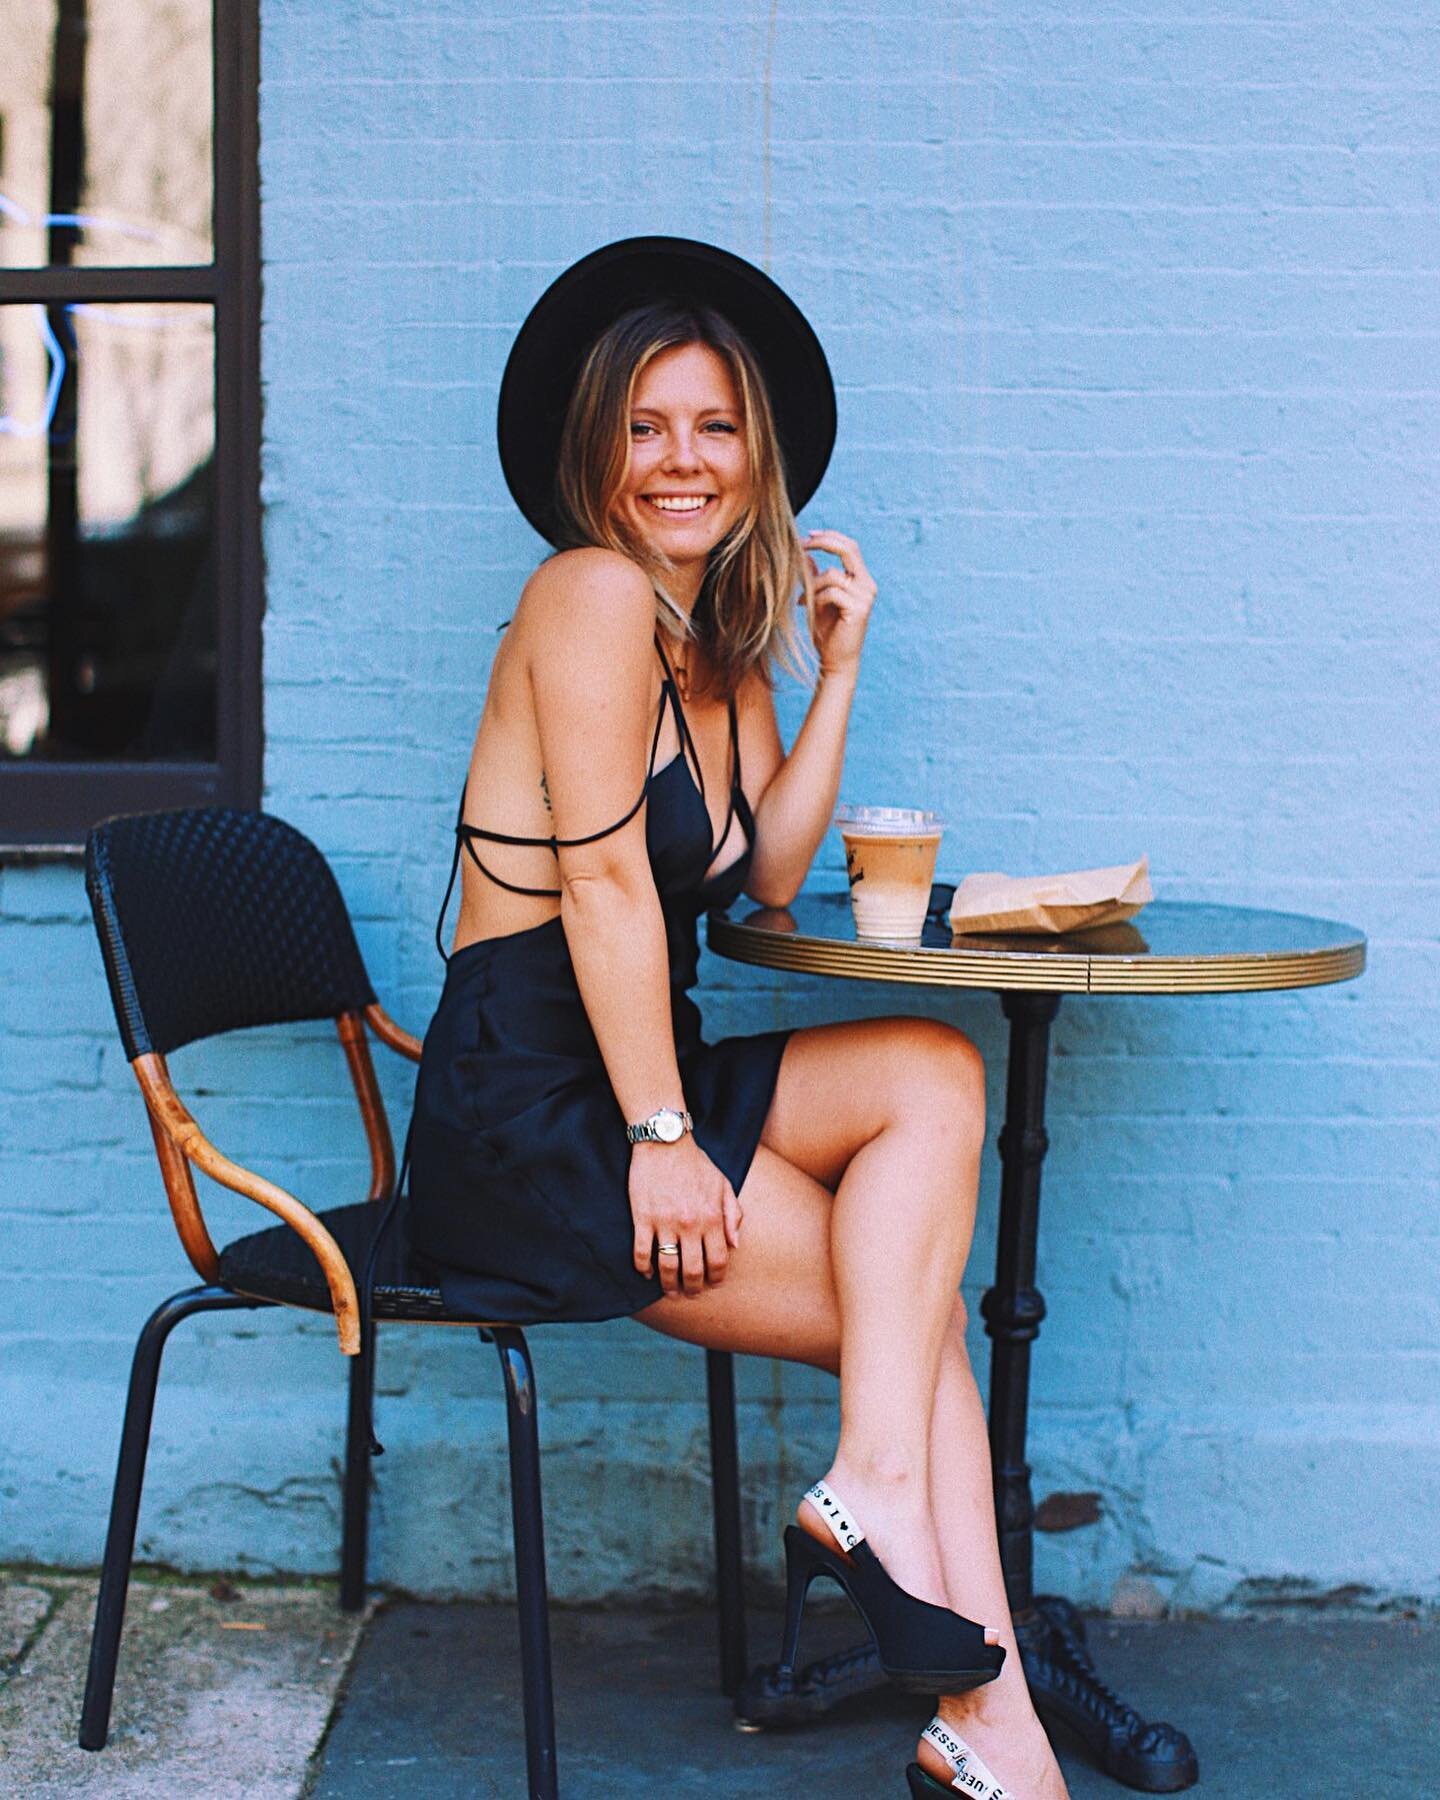 Exploring the lower east side with @alexa.groza. @cafekitsune thanks for the coffees!